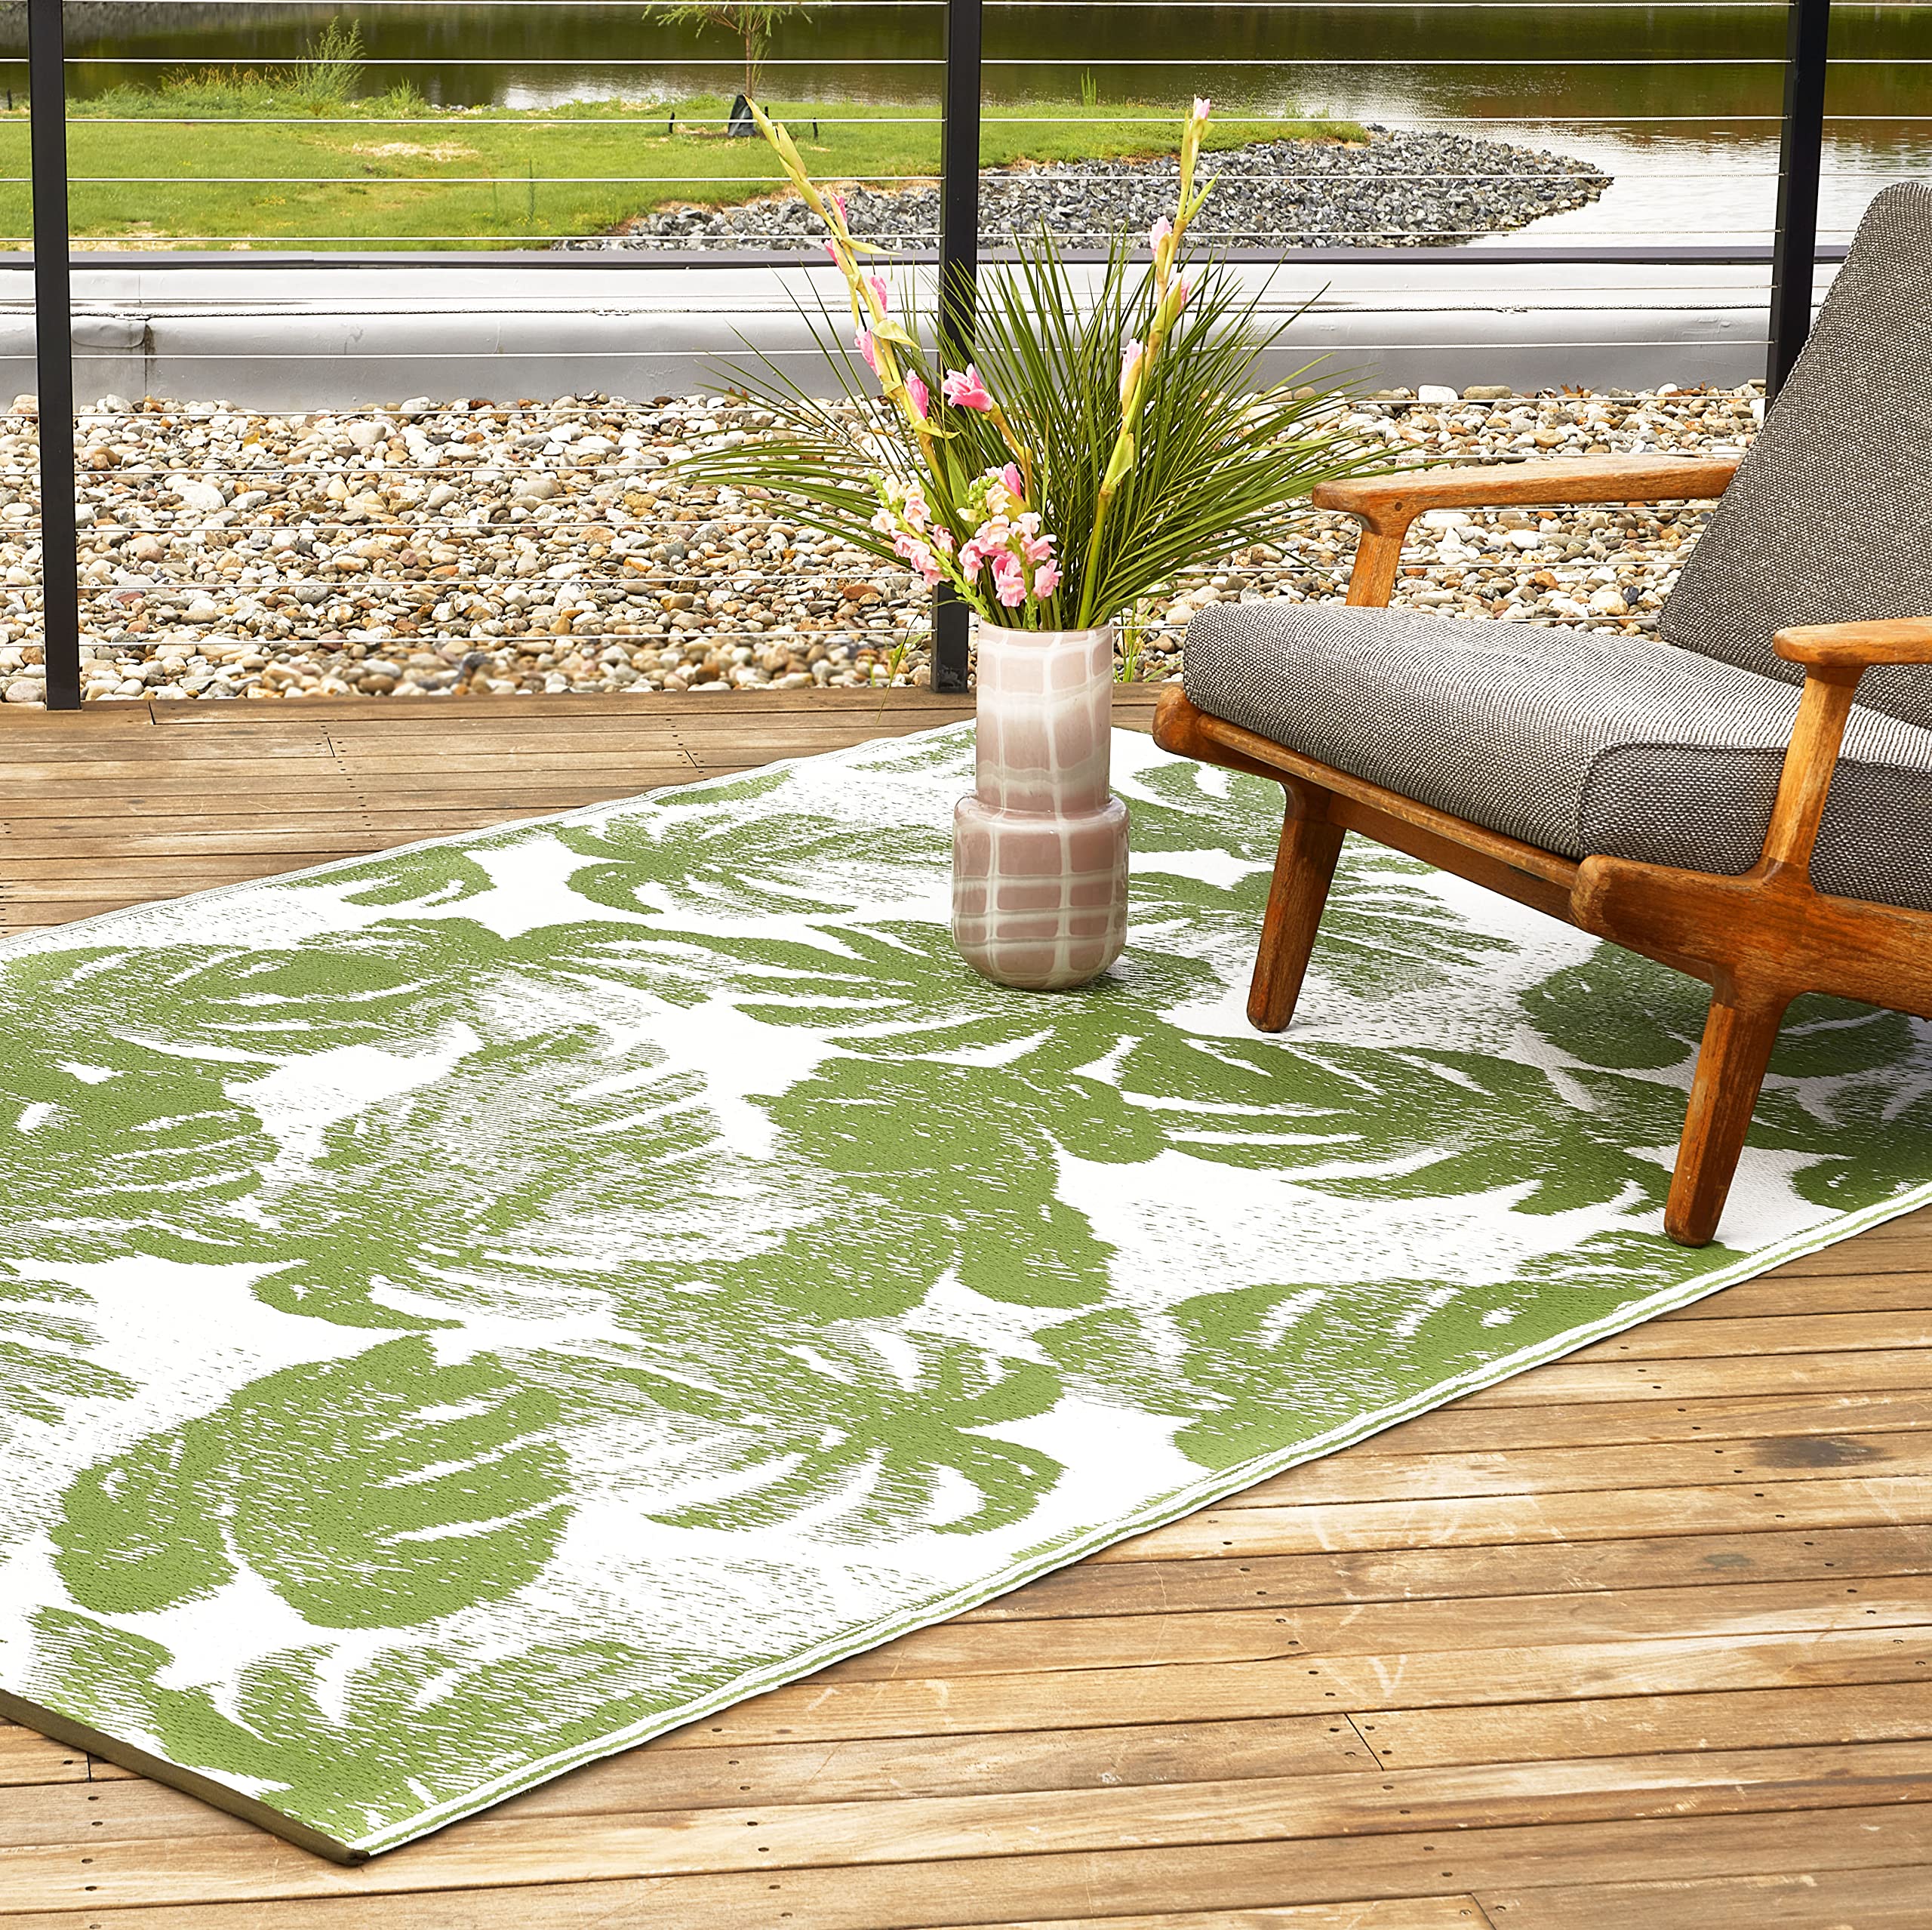 Fab Habitat Outdoor Rug - Waterproof, Fade Resistant, Crease-Free - Premium Recycled Plastic - Tropical Palm Leaf Botanical - Po